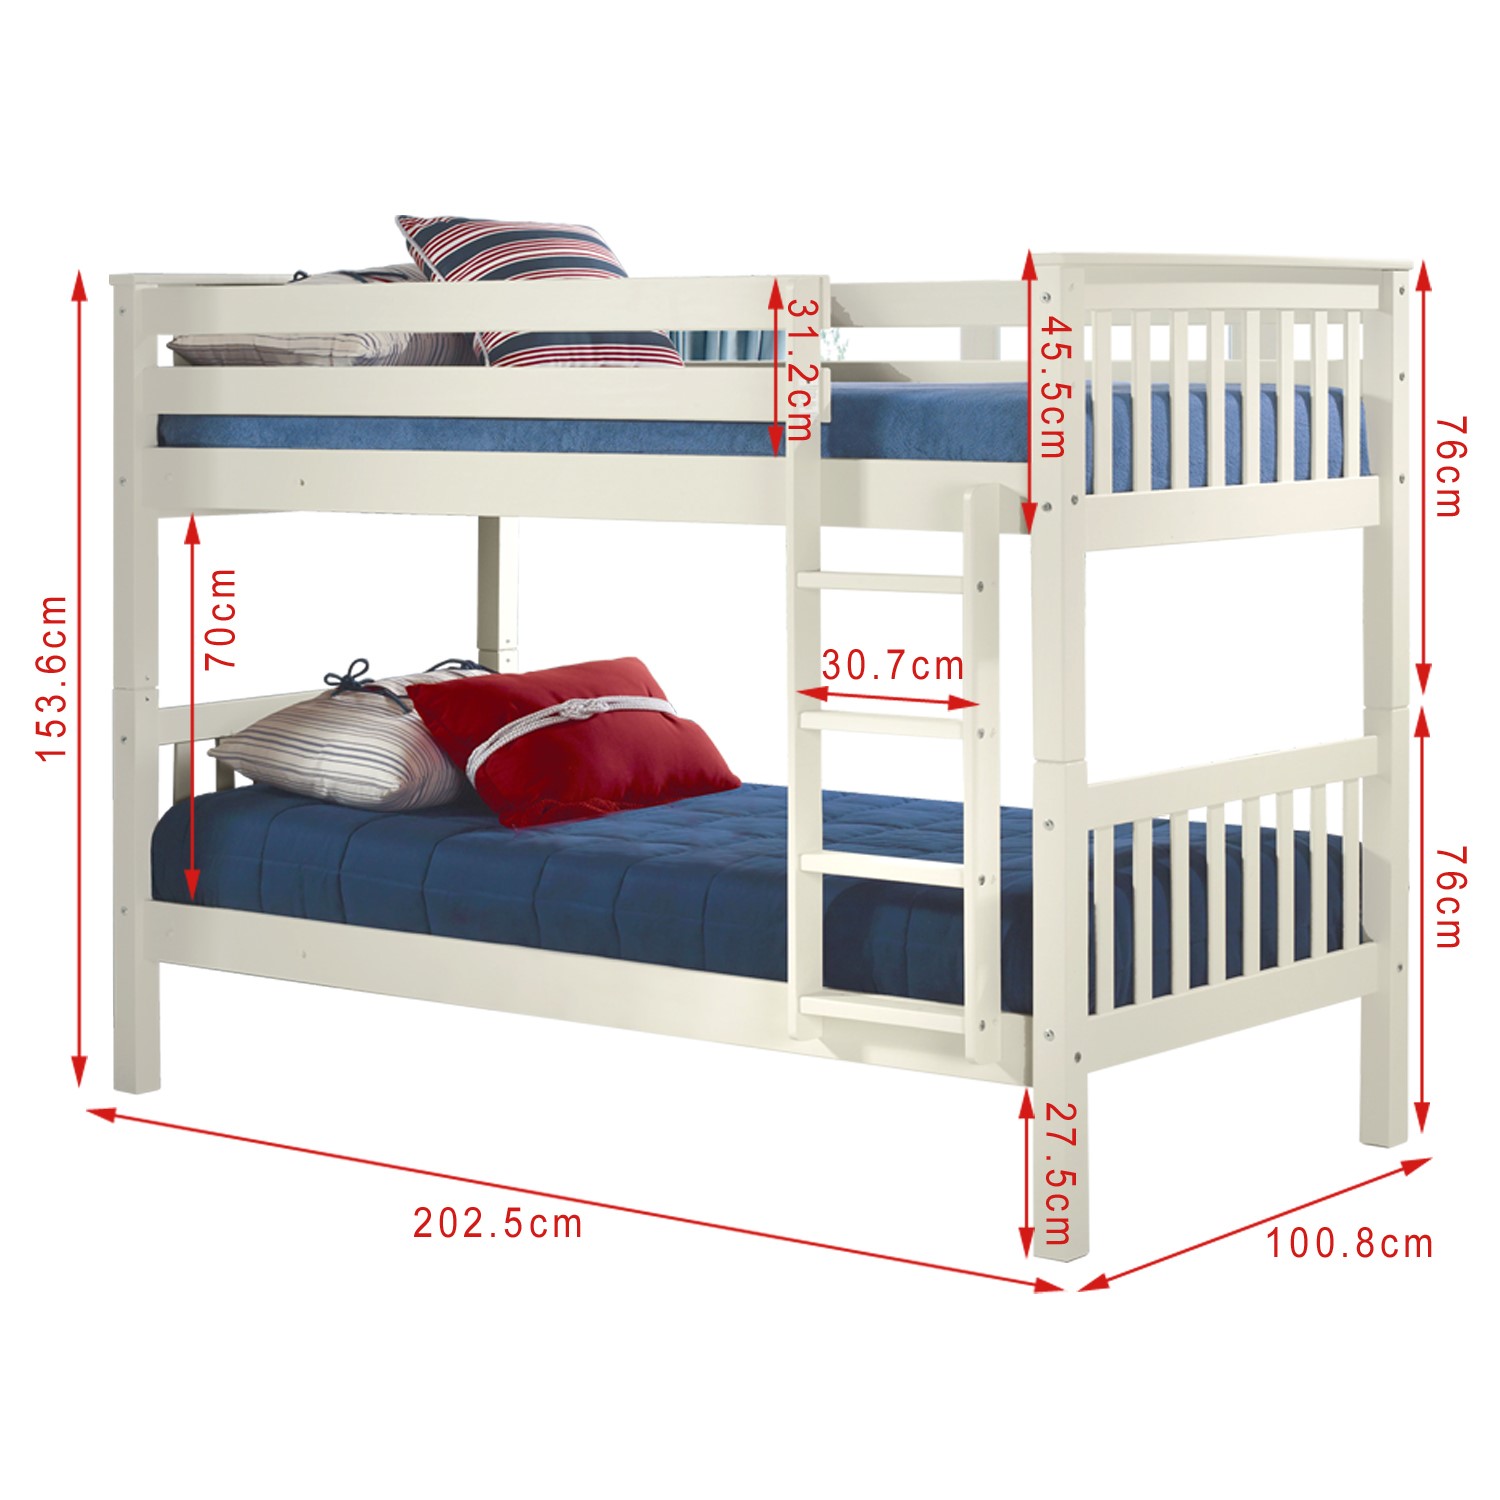 Oxford Single Bunk Bed In White, Bunk Bed Mattress Size